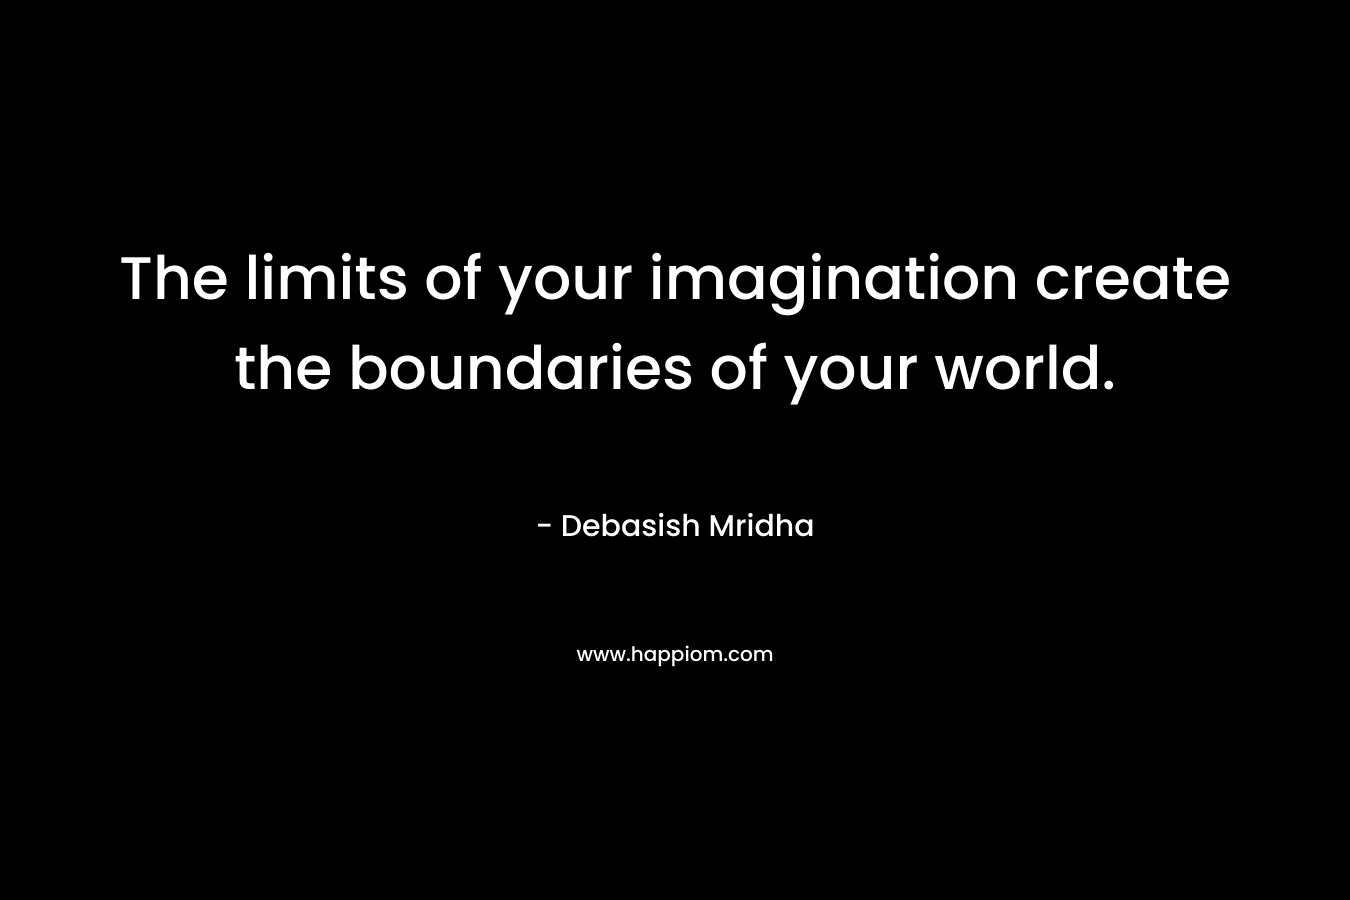 The limits of your imagination create the boundaries of your world.